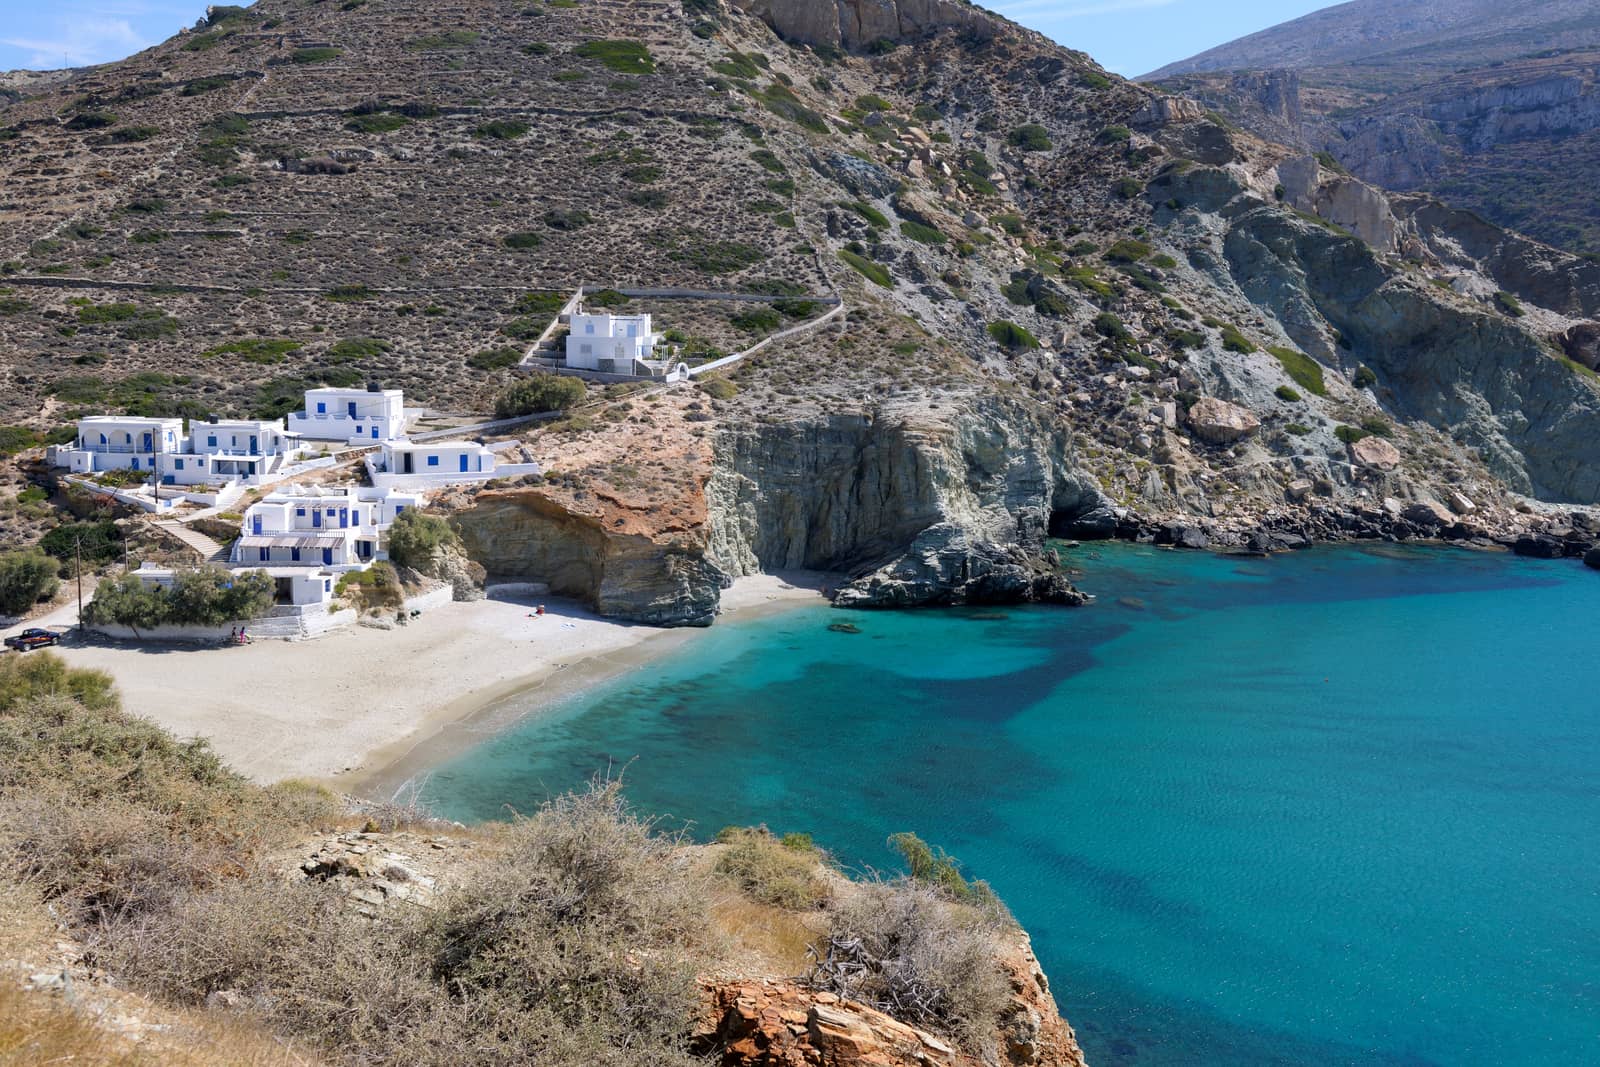 Folegandros island sailing holidays, Sikinos guide and yacht charters.